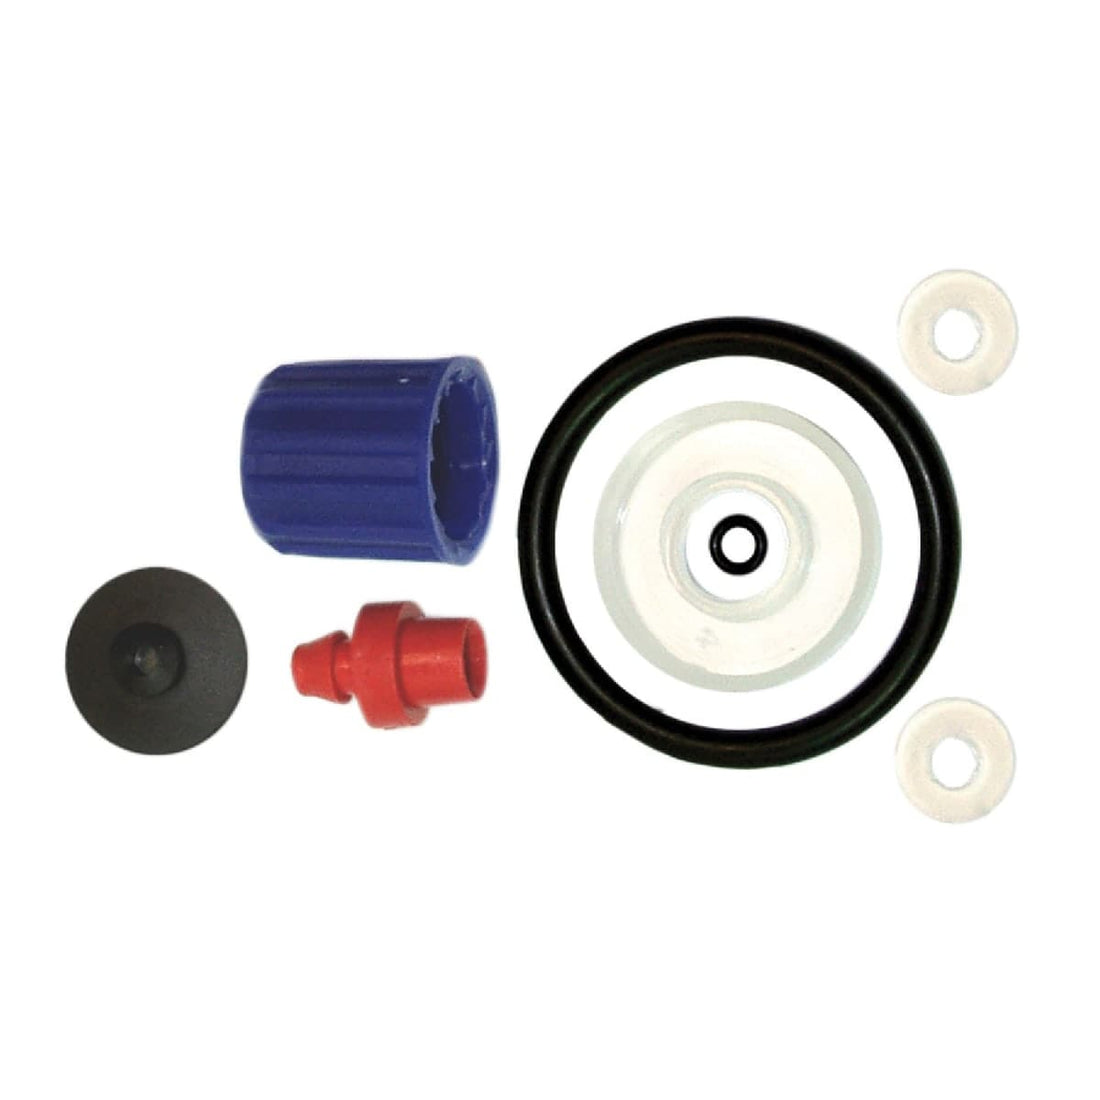 REPLACEMENT KIT FOR 5 TO 10 L PRESSURE SPRAYERS - best price from Maltashopper.com BR500440088